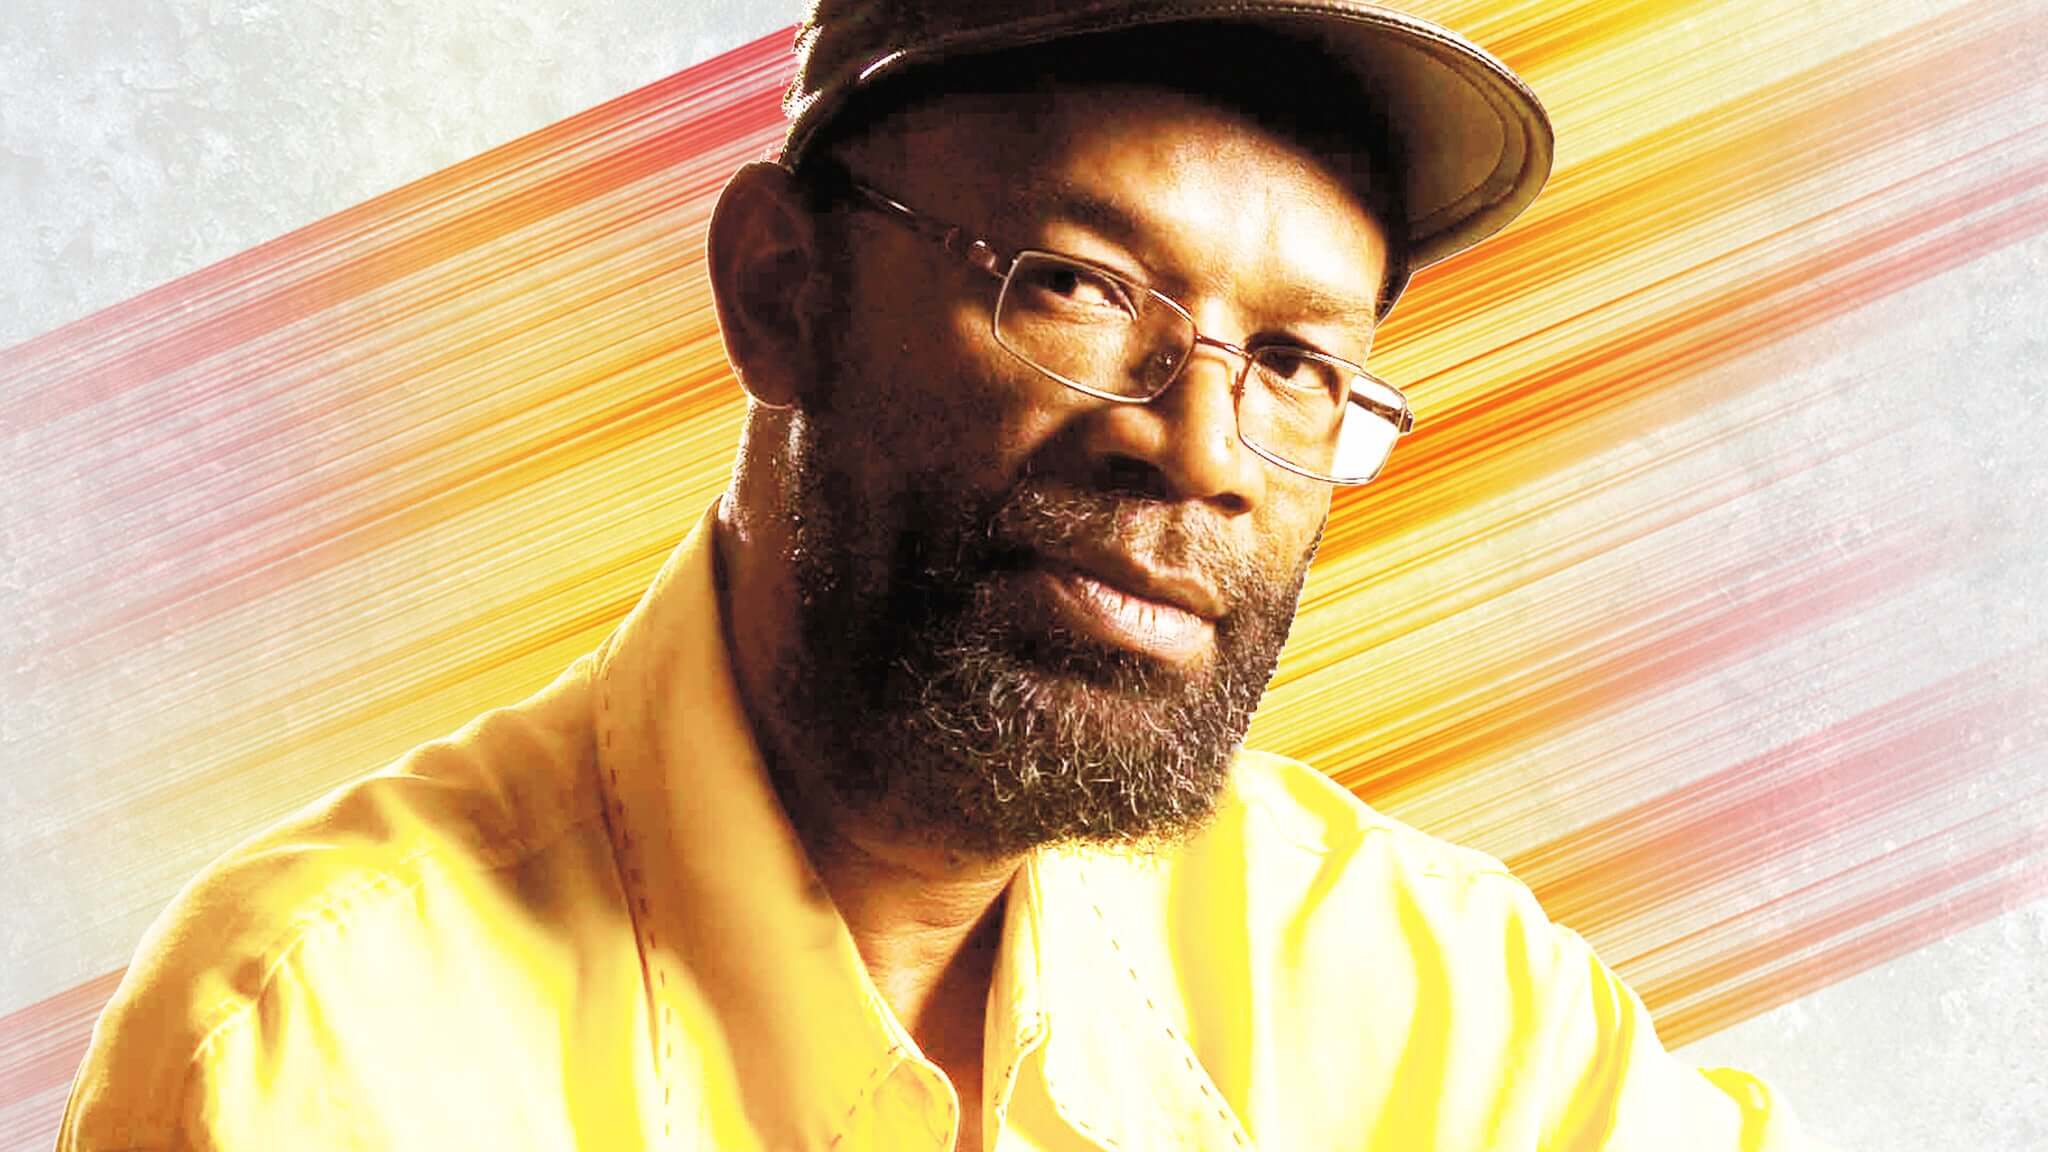 Beres Hammond's "Call To Duty" Vision Newspaper